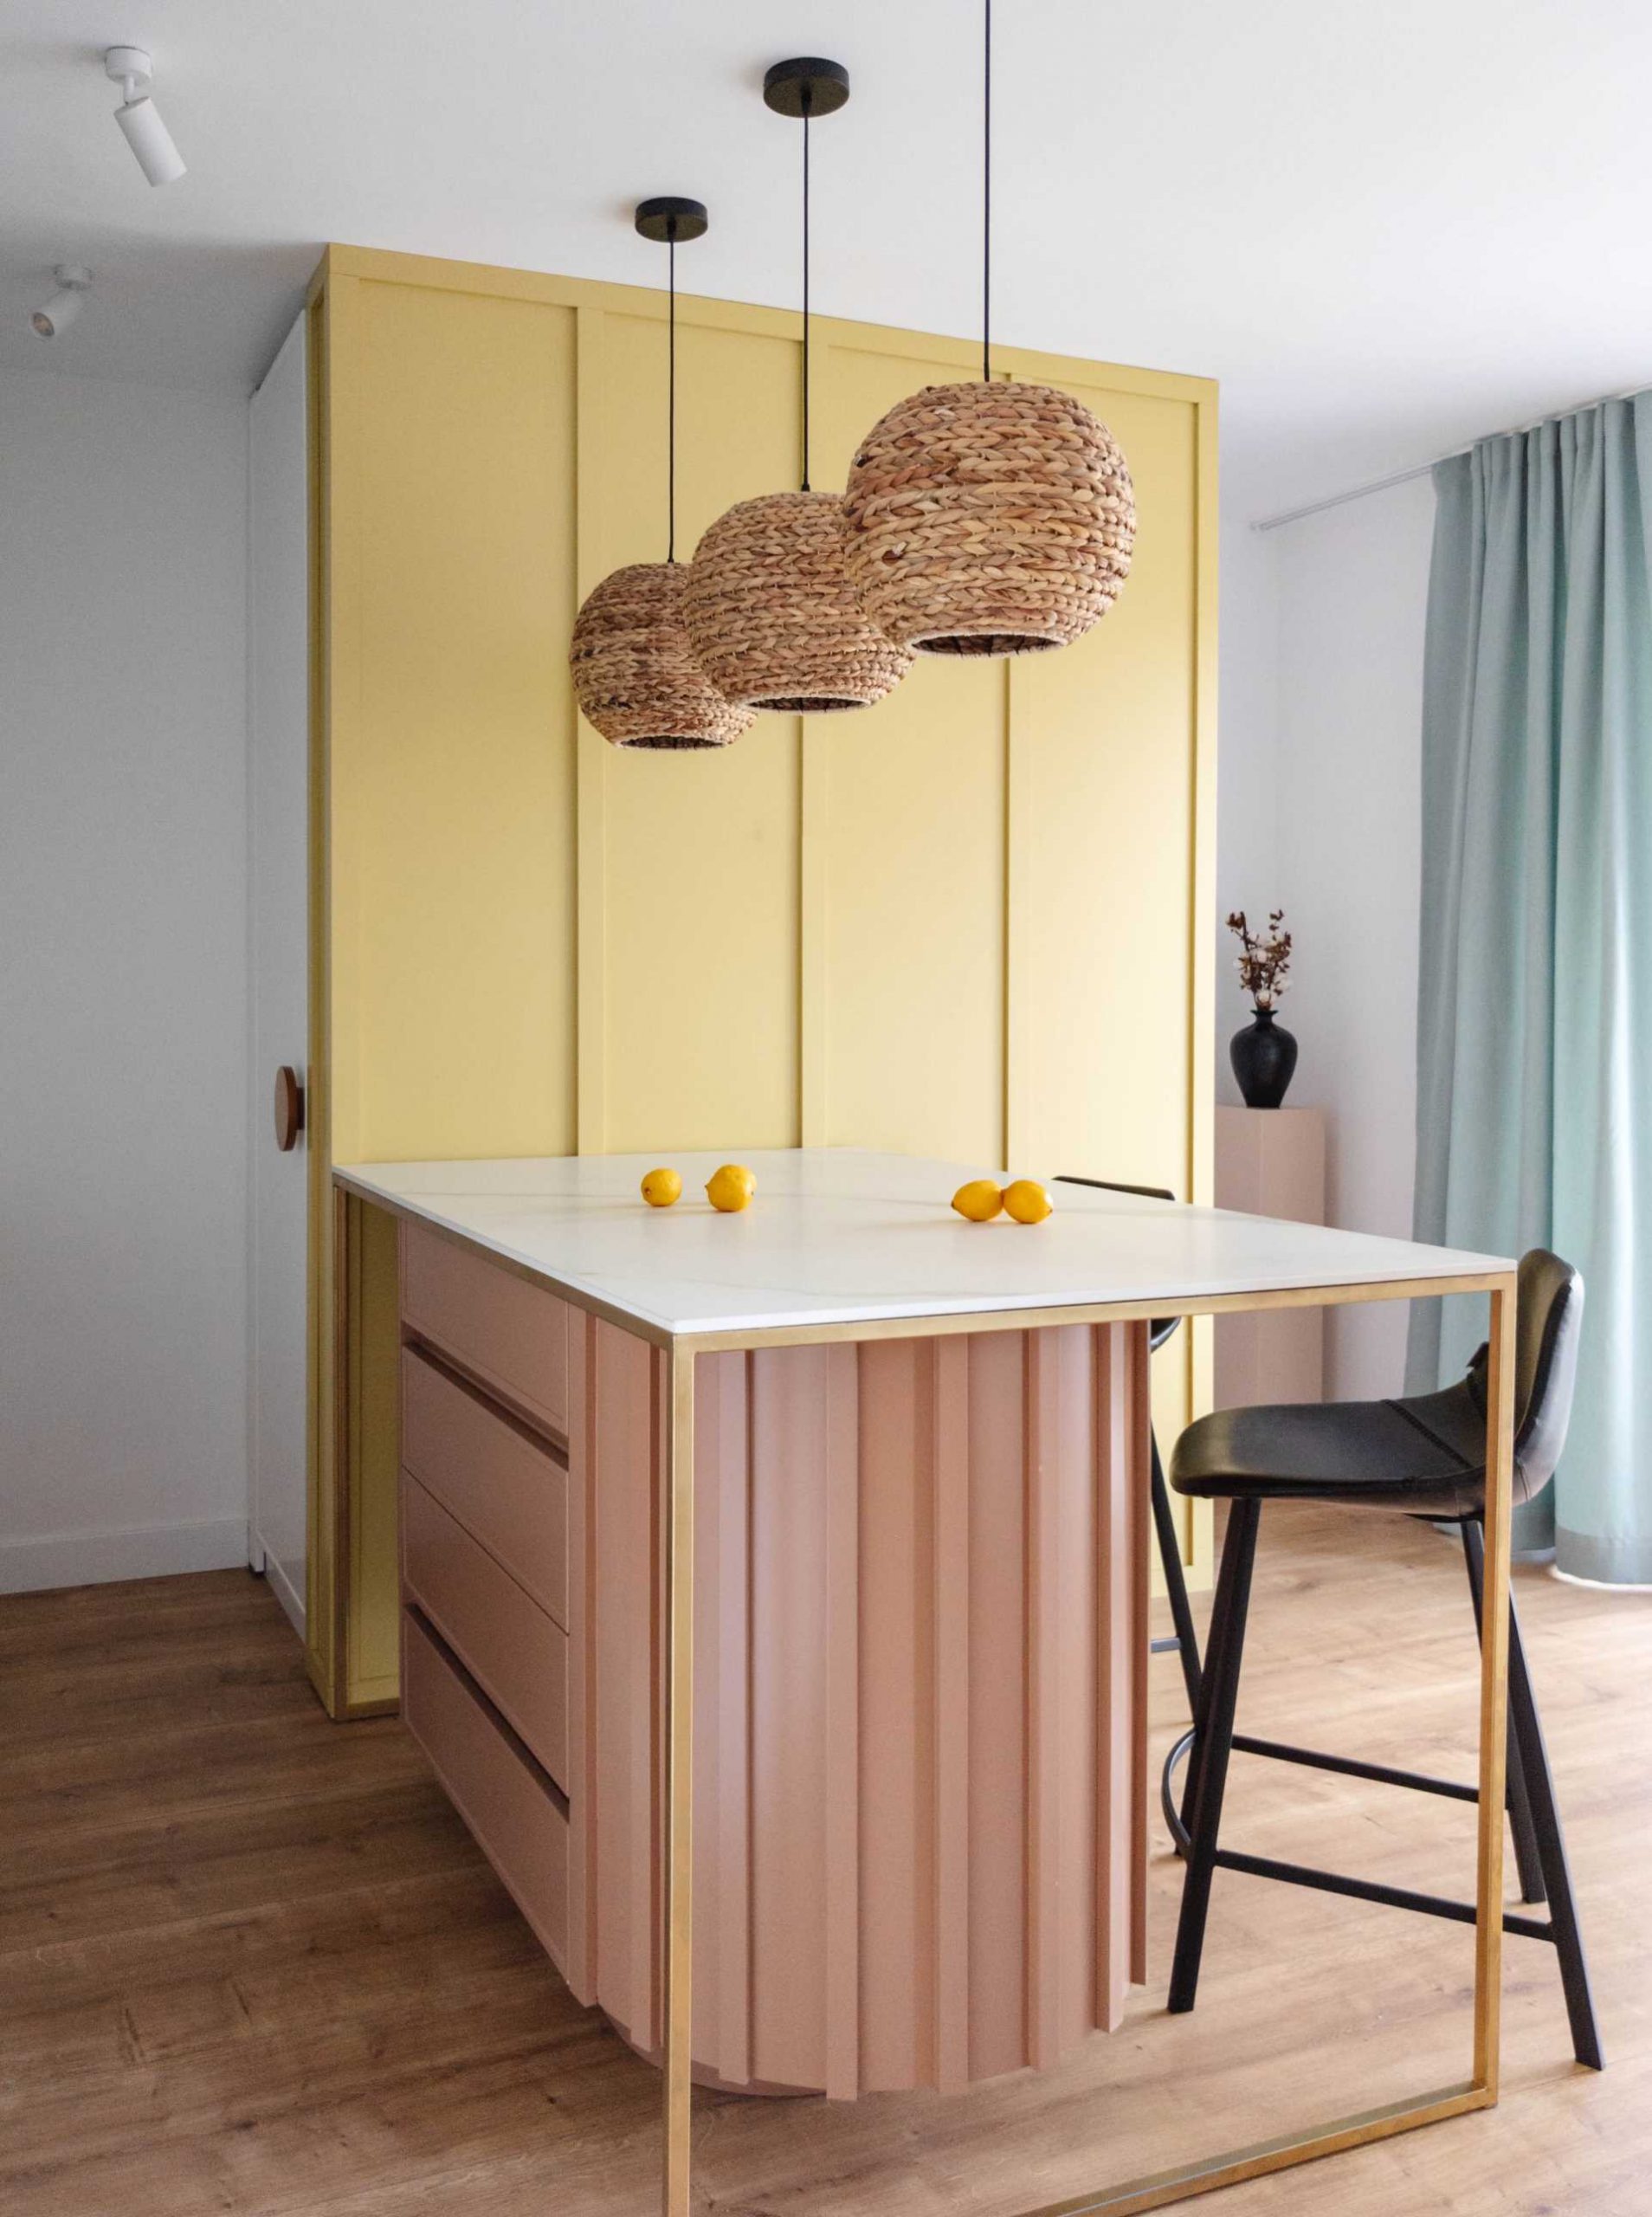 Pastel colors have been used to brighten up this contemporary kitchen, with a yellow accent wall, a curved light pink base for the peninsula, and woven pendant lights that add a natural touch to the space.